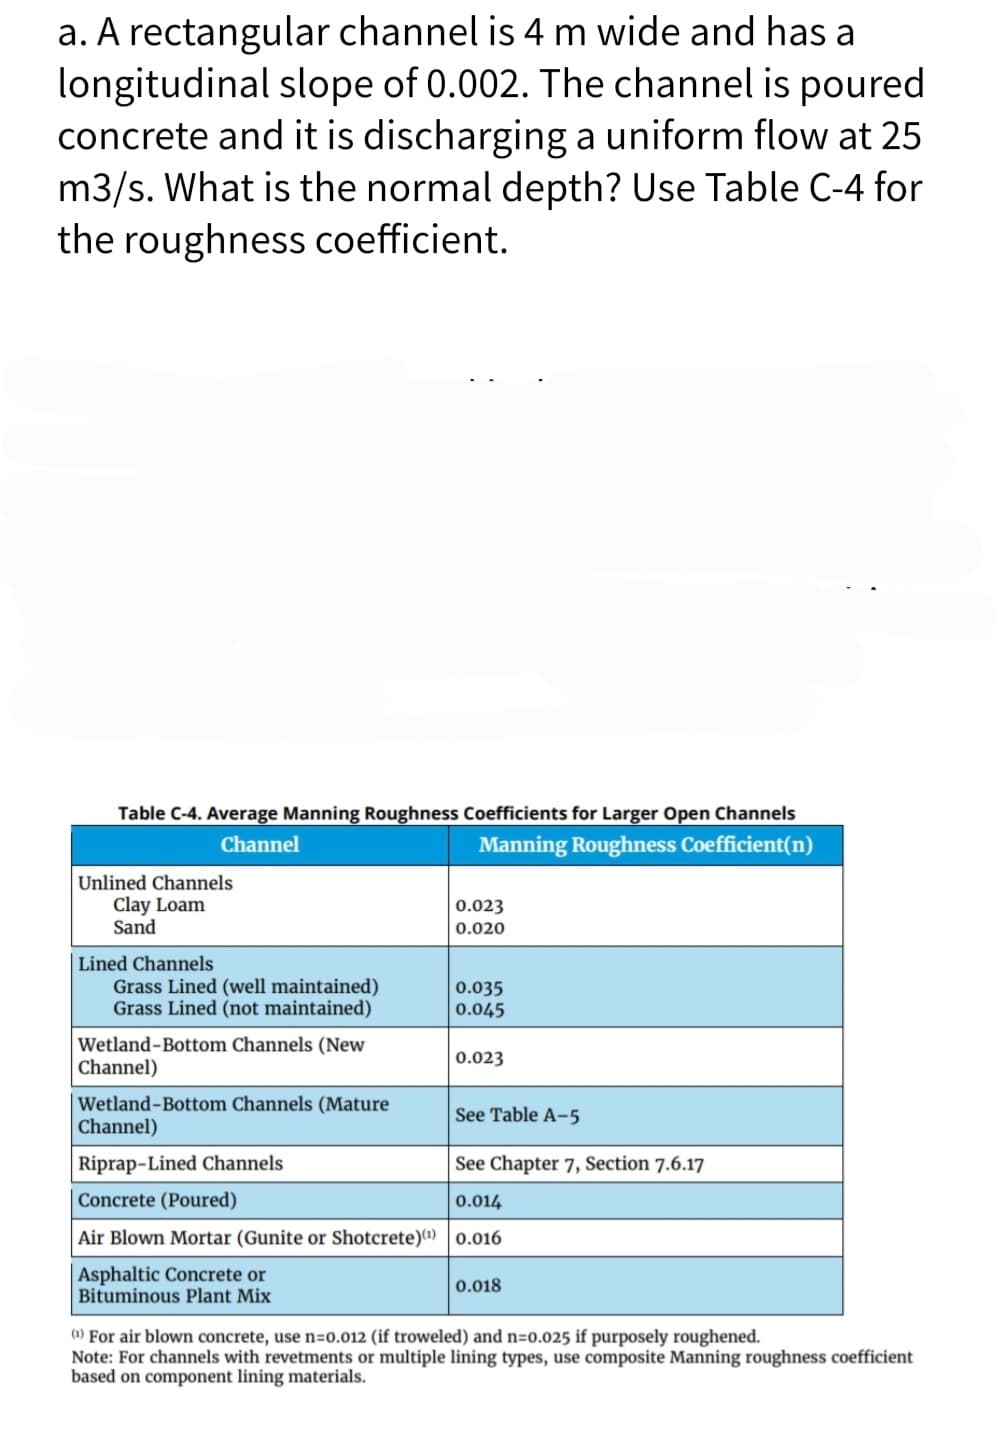 a. A rectangular channel is 4 m wide and has a
longitudinal slope of 0.002. The channel is poured
concrete and it is discharging a uniform flow at 25
m3/s. What is the normal depth? Use Table C-4 for
the roughness coefficient.
Table C-4. Average Manning Roughness Coefficients for Larger Open Channels
Channel
Manning Roughness Coefficient(n)
Unlined Channels
Clay Loam
Sand
Lined Channels
Grass Lined (well maintained)
Grass Lined (not maintained)
Wetland-Bottom Channels (New
Channel)
0.023
0.020
0.035
0.045
0.023
Wetland-Bottom Channels (Mature
Channel)
See Table A-5
Riprap-Lined Channels
See Chapter 7, Section 7.6.17
Concrete (Poured)
0.014
Air Blown Mortar (Gunite or Shotcrete)(¹) 0.016
Asphaltic Concrete or
Bituminous Plant Mix
0.018
(¹) For air blown concrete, use n=0.012 (if troweled) and n=0.025 if purposely roughened.
Note: For channels with revetments or multiple lining types, use composite Manning roughness coefficient
based on component lining materials.